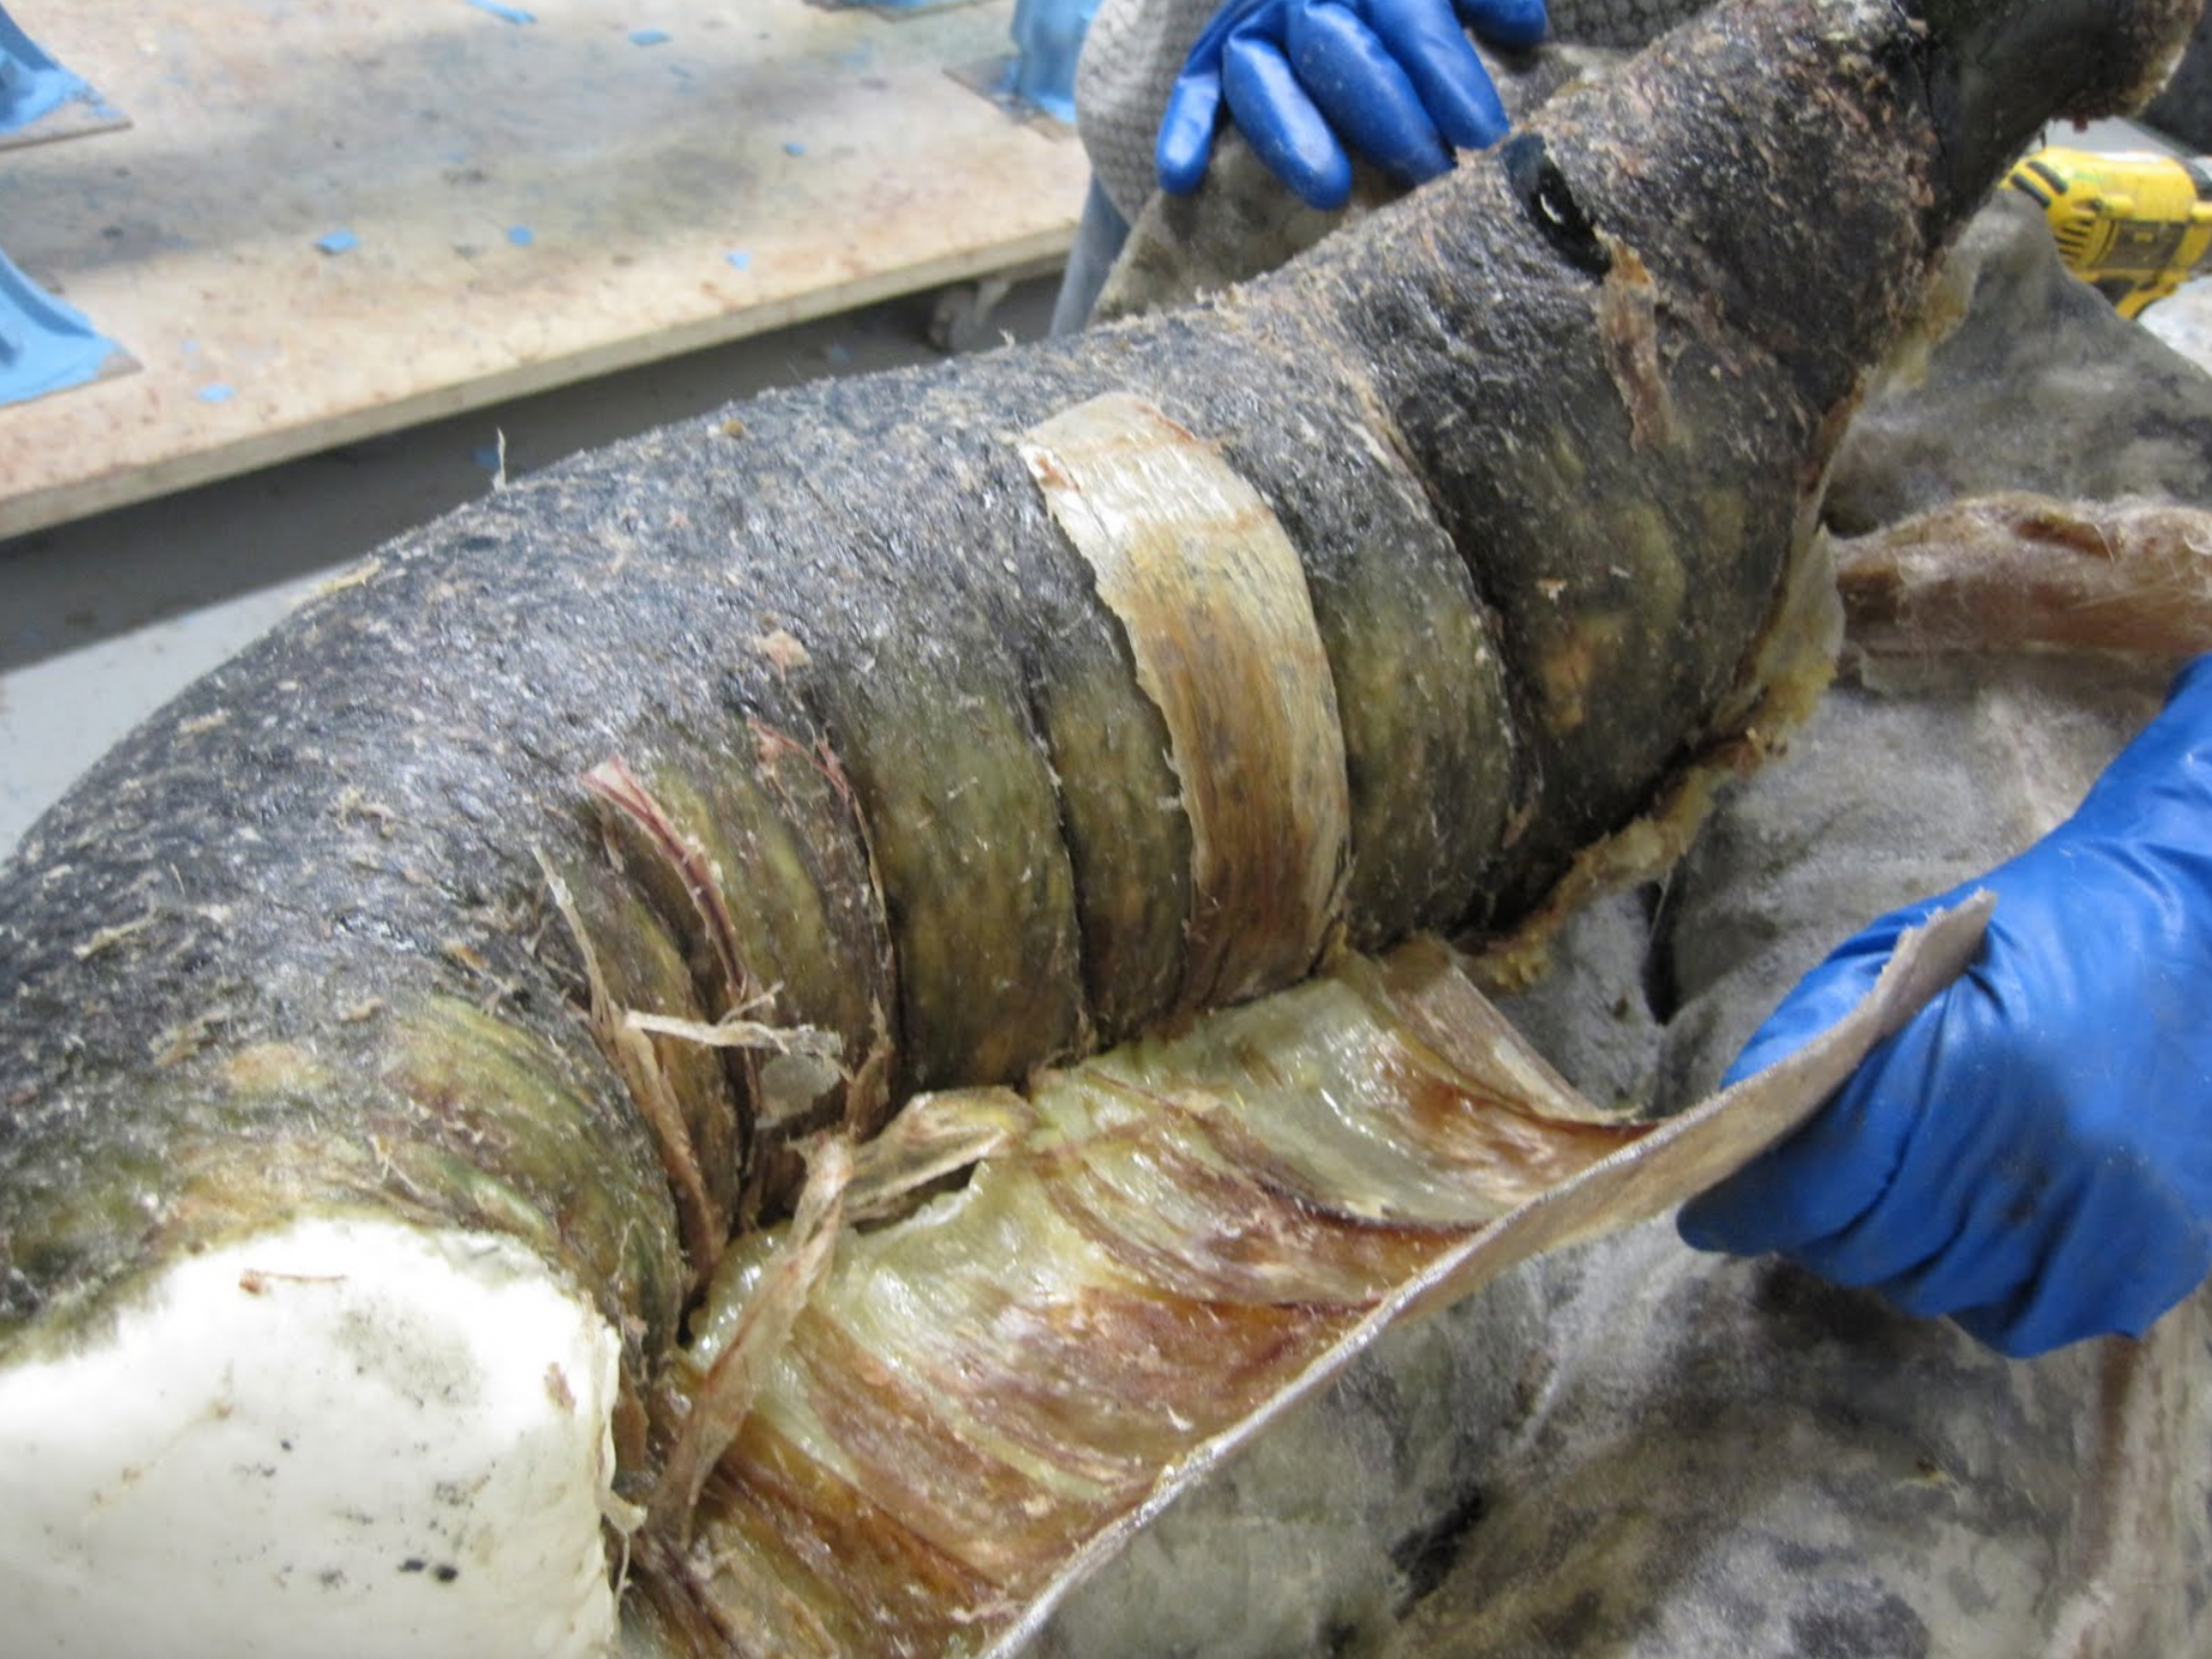 The biological material being removed from the reproduction core of the equine colon.